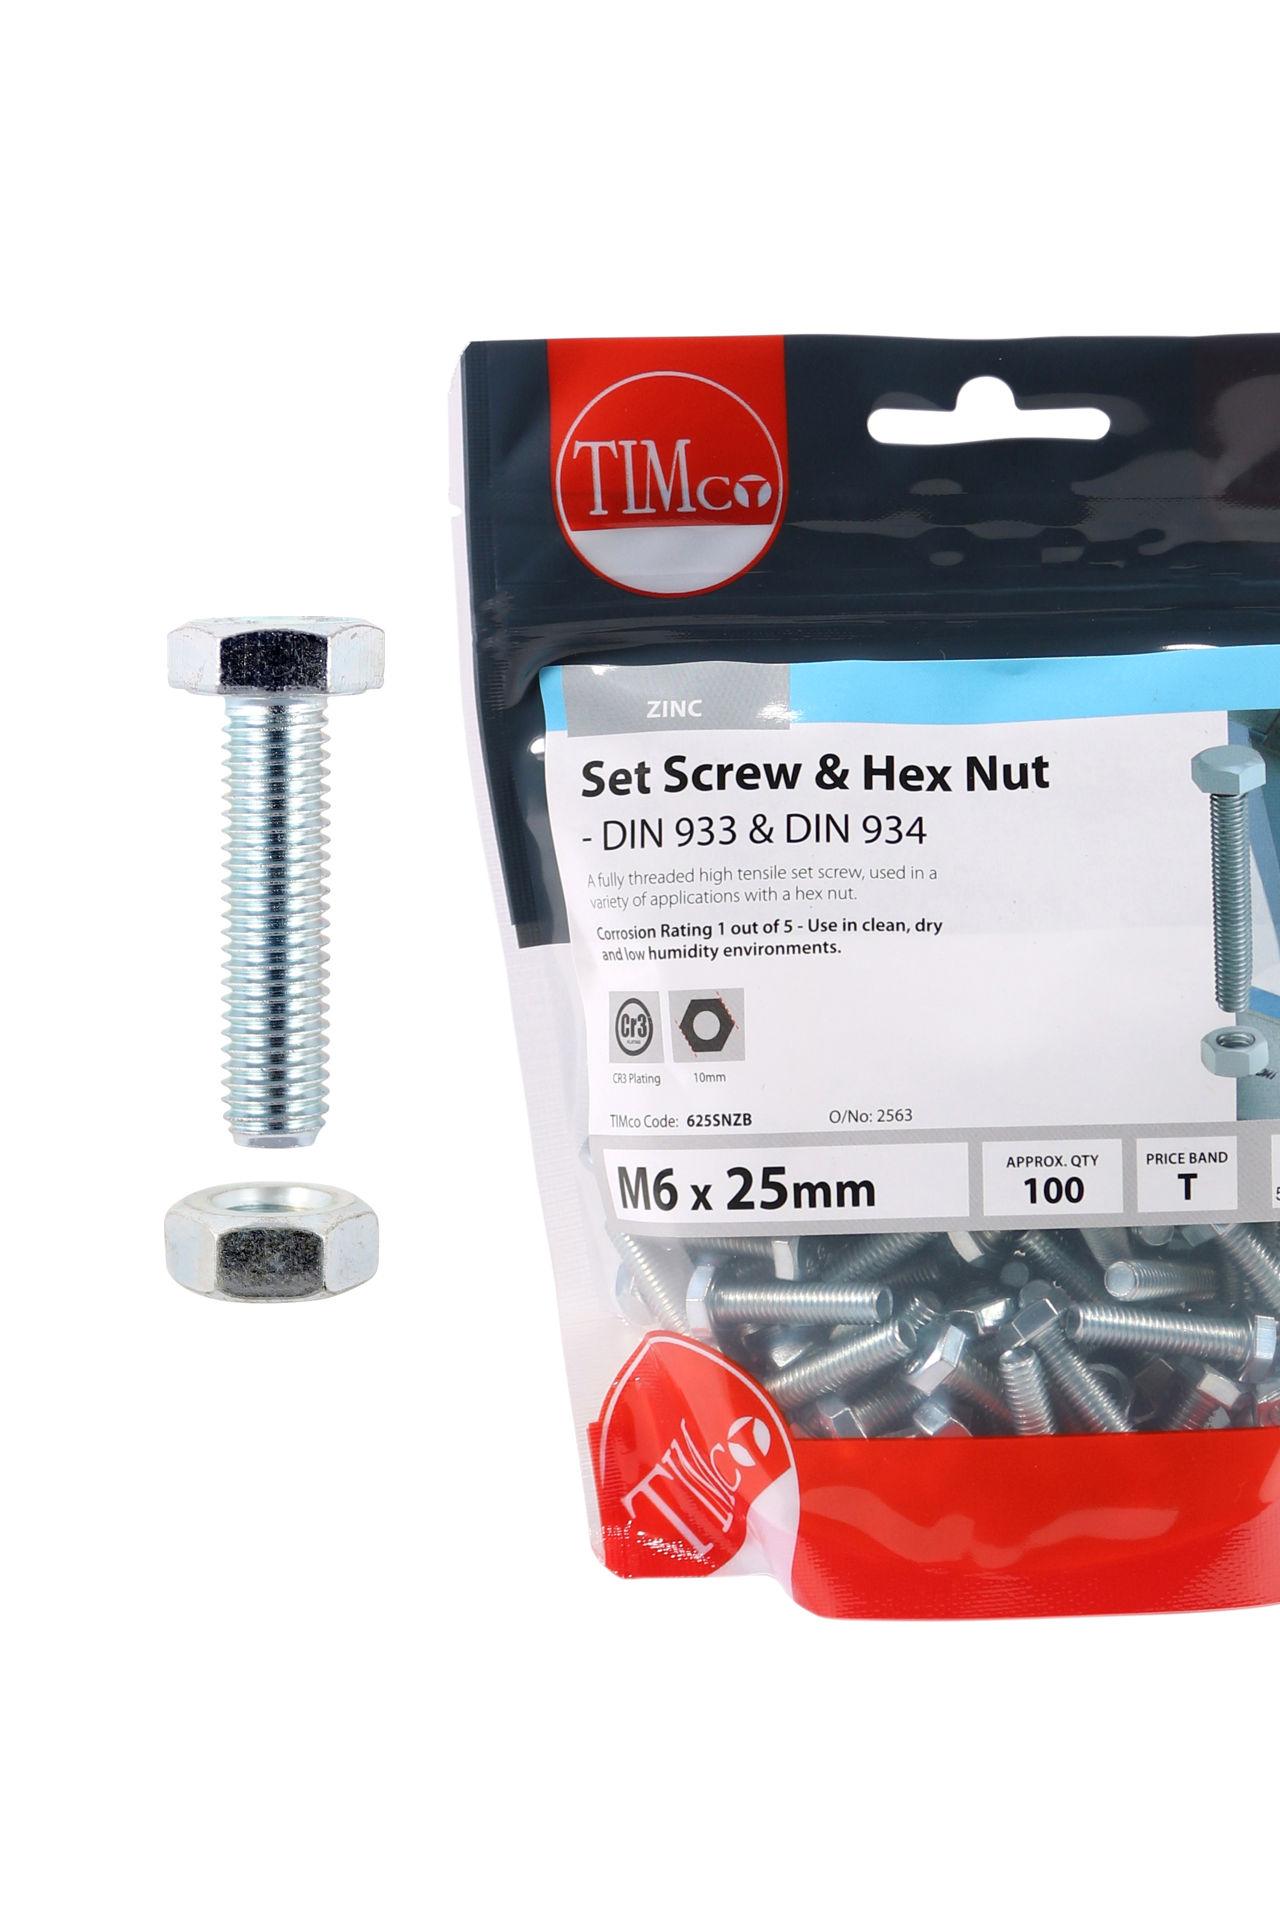 M6 Nuts and Bolts #1